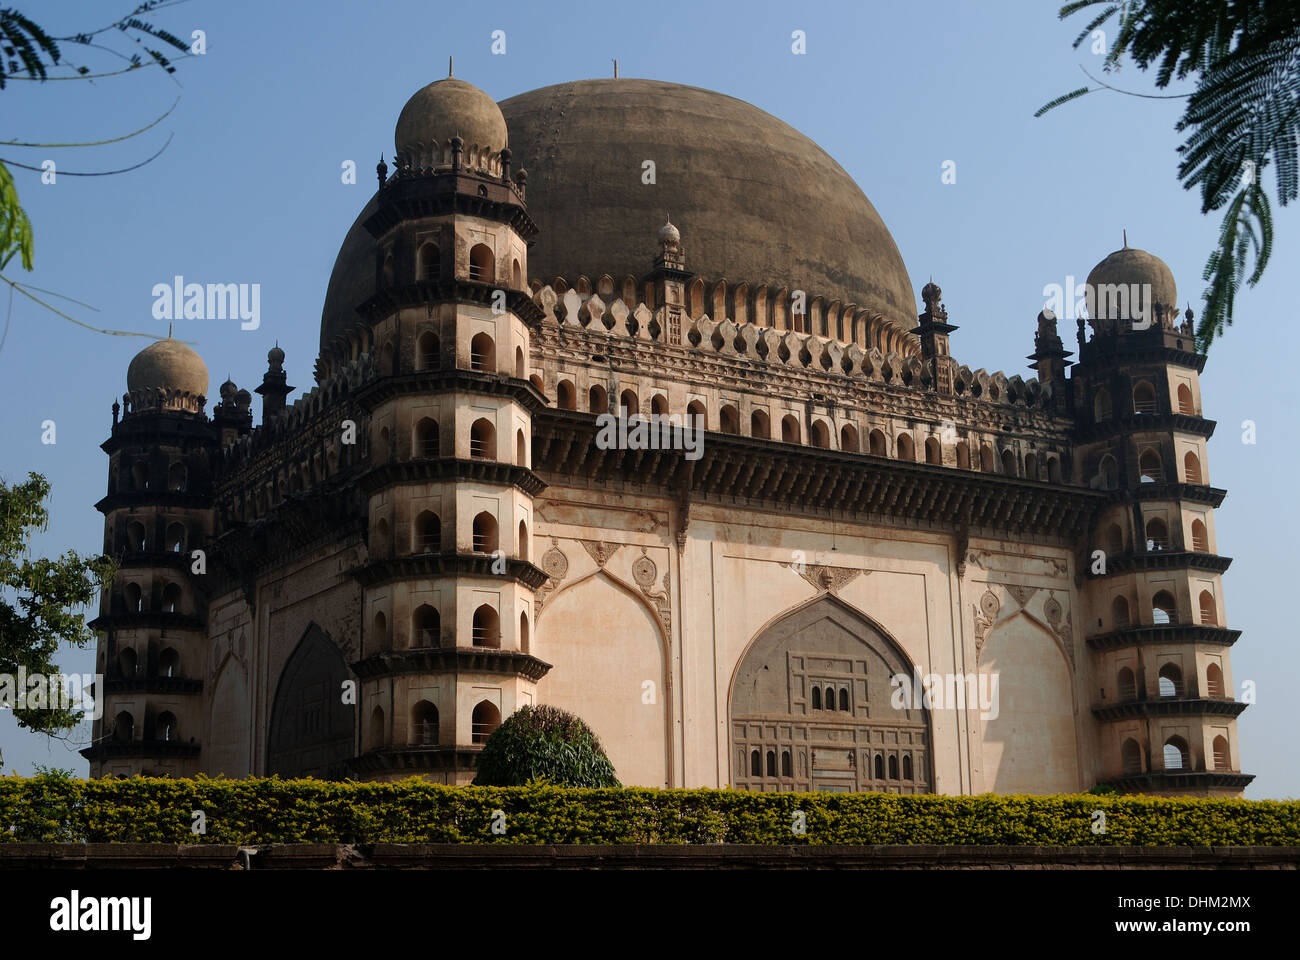 gol gumbaz,bijapur,india.This islamic architecture is the tomb of mohamed adil shah. Stock Photo